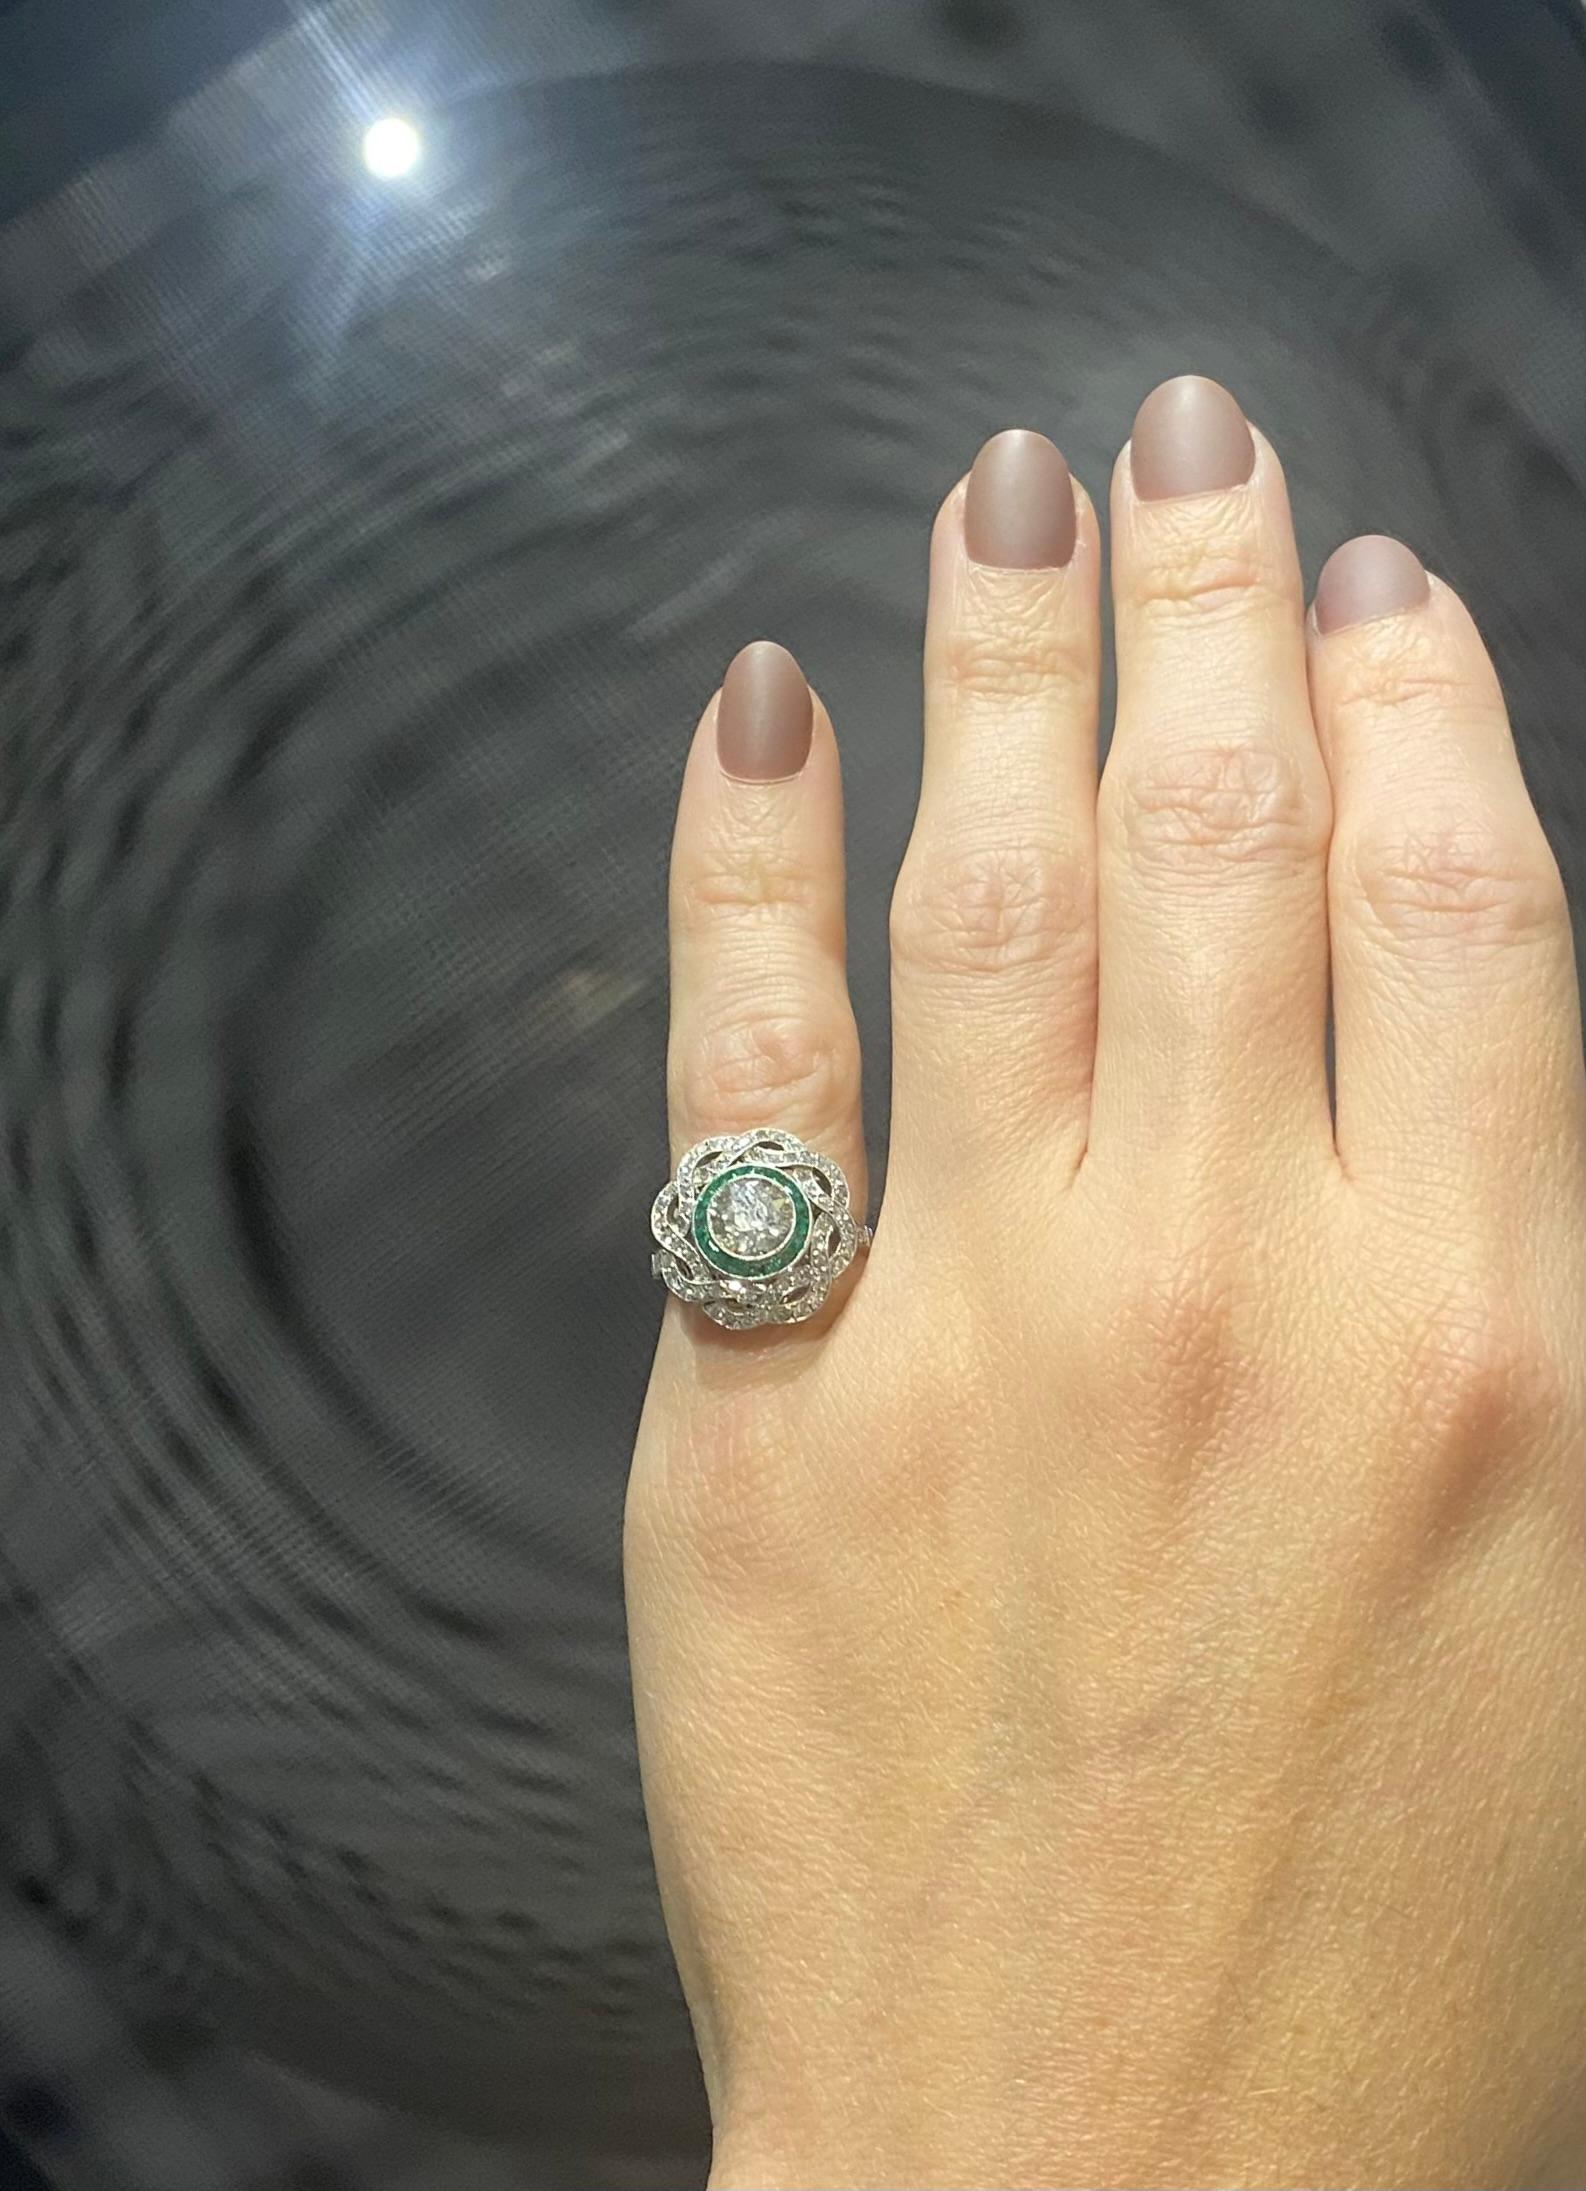 An art deco revival ring in platinum.

Beautiful ring carefully crafted with art deco patterns in solid platinum .900/.999 and embellished with a great selection of natural earth mined gemstones. All settings are finished with millegrain